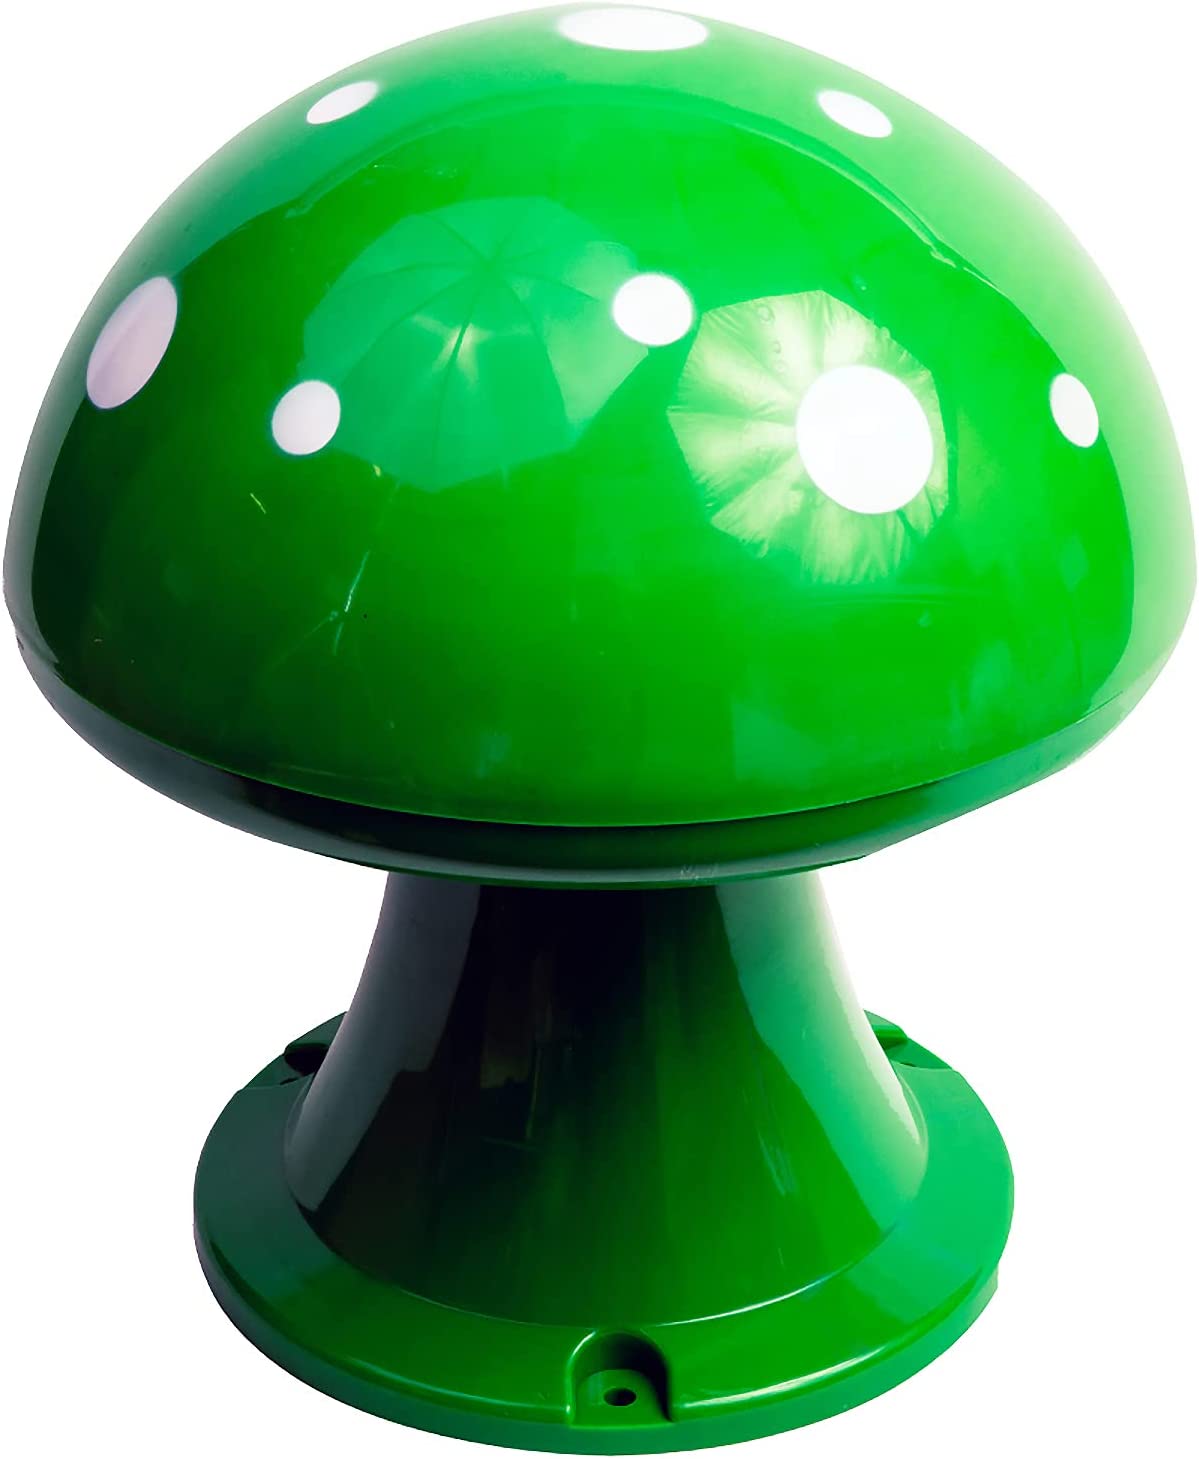 Outdoor Rock Speaker Green | Weatherproof Wired Durable Speaker| Built for all Seasons Perfect for Pool, Patio, Deck, Garden, and Home- GS MUSHROOM